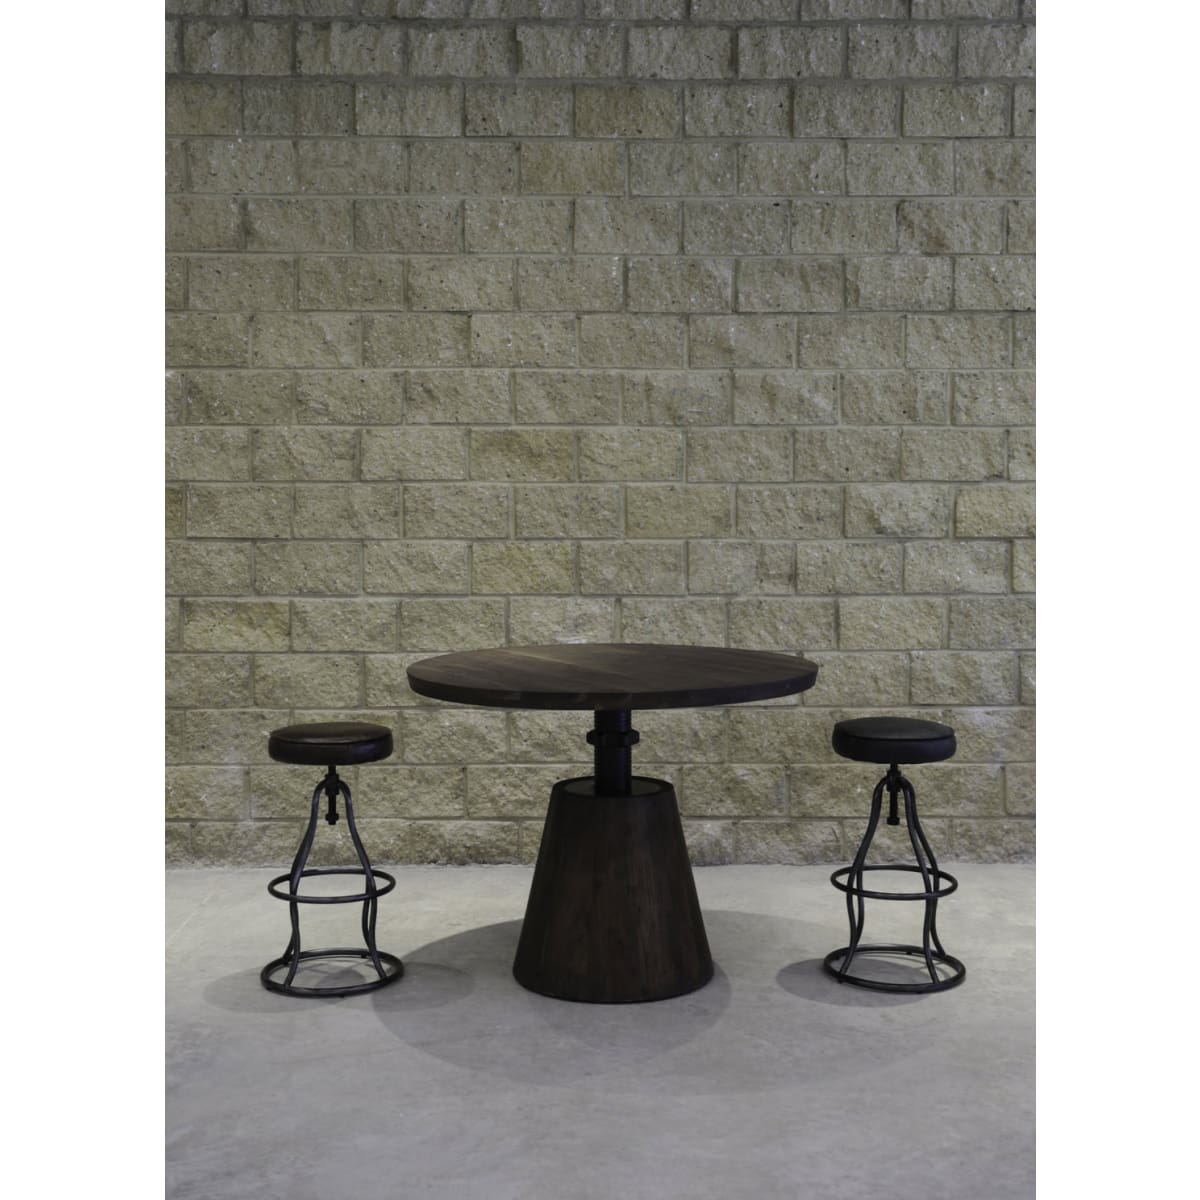 Bowie Bar Stool - Distressed Black Leather - lh-import-stools